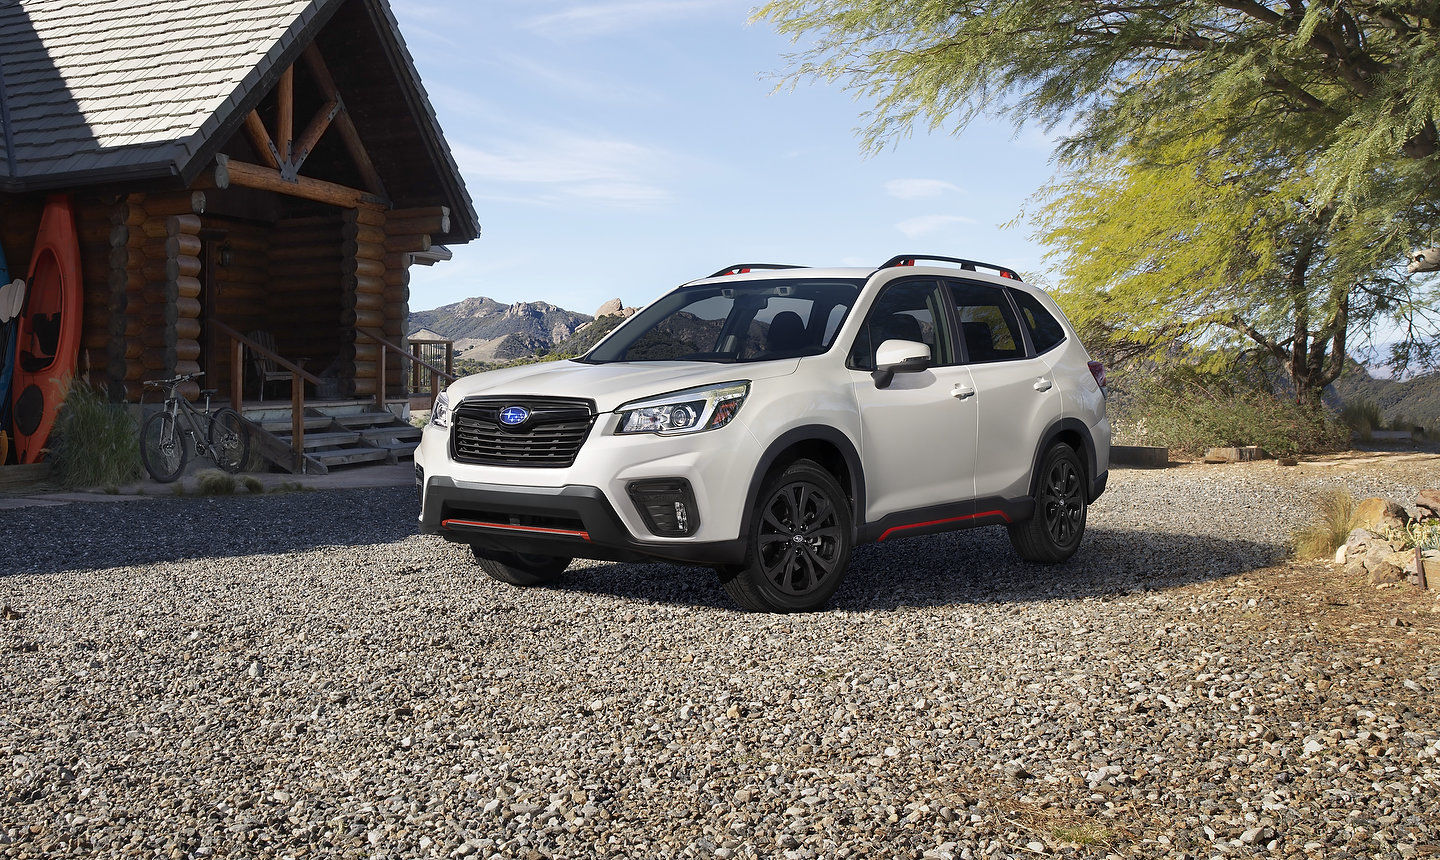 2020 Subaru Forester Price, Versions, and Specs